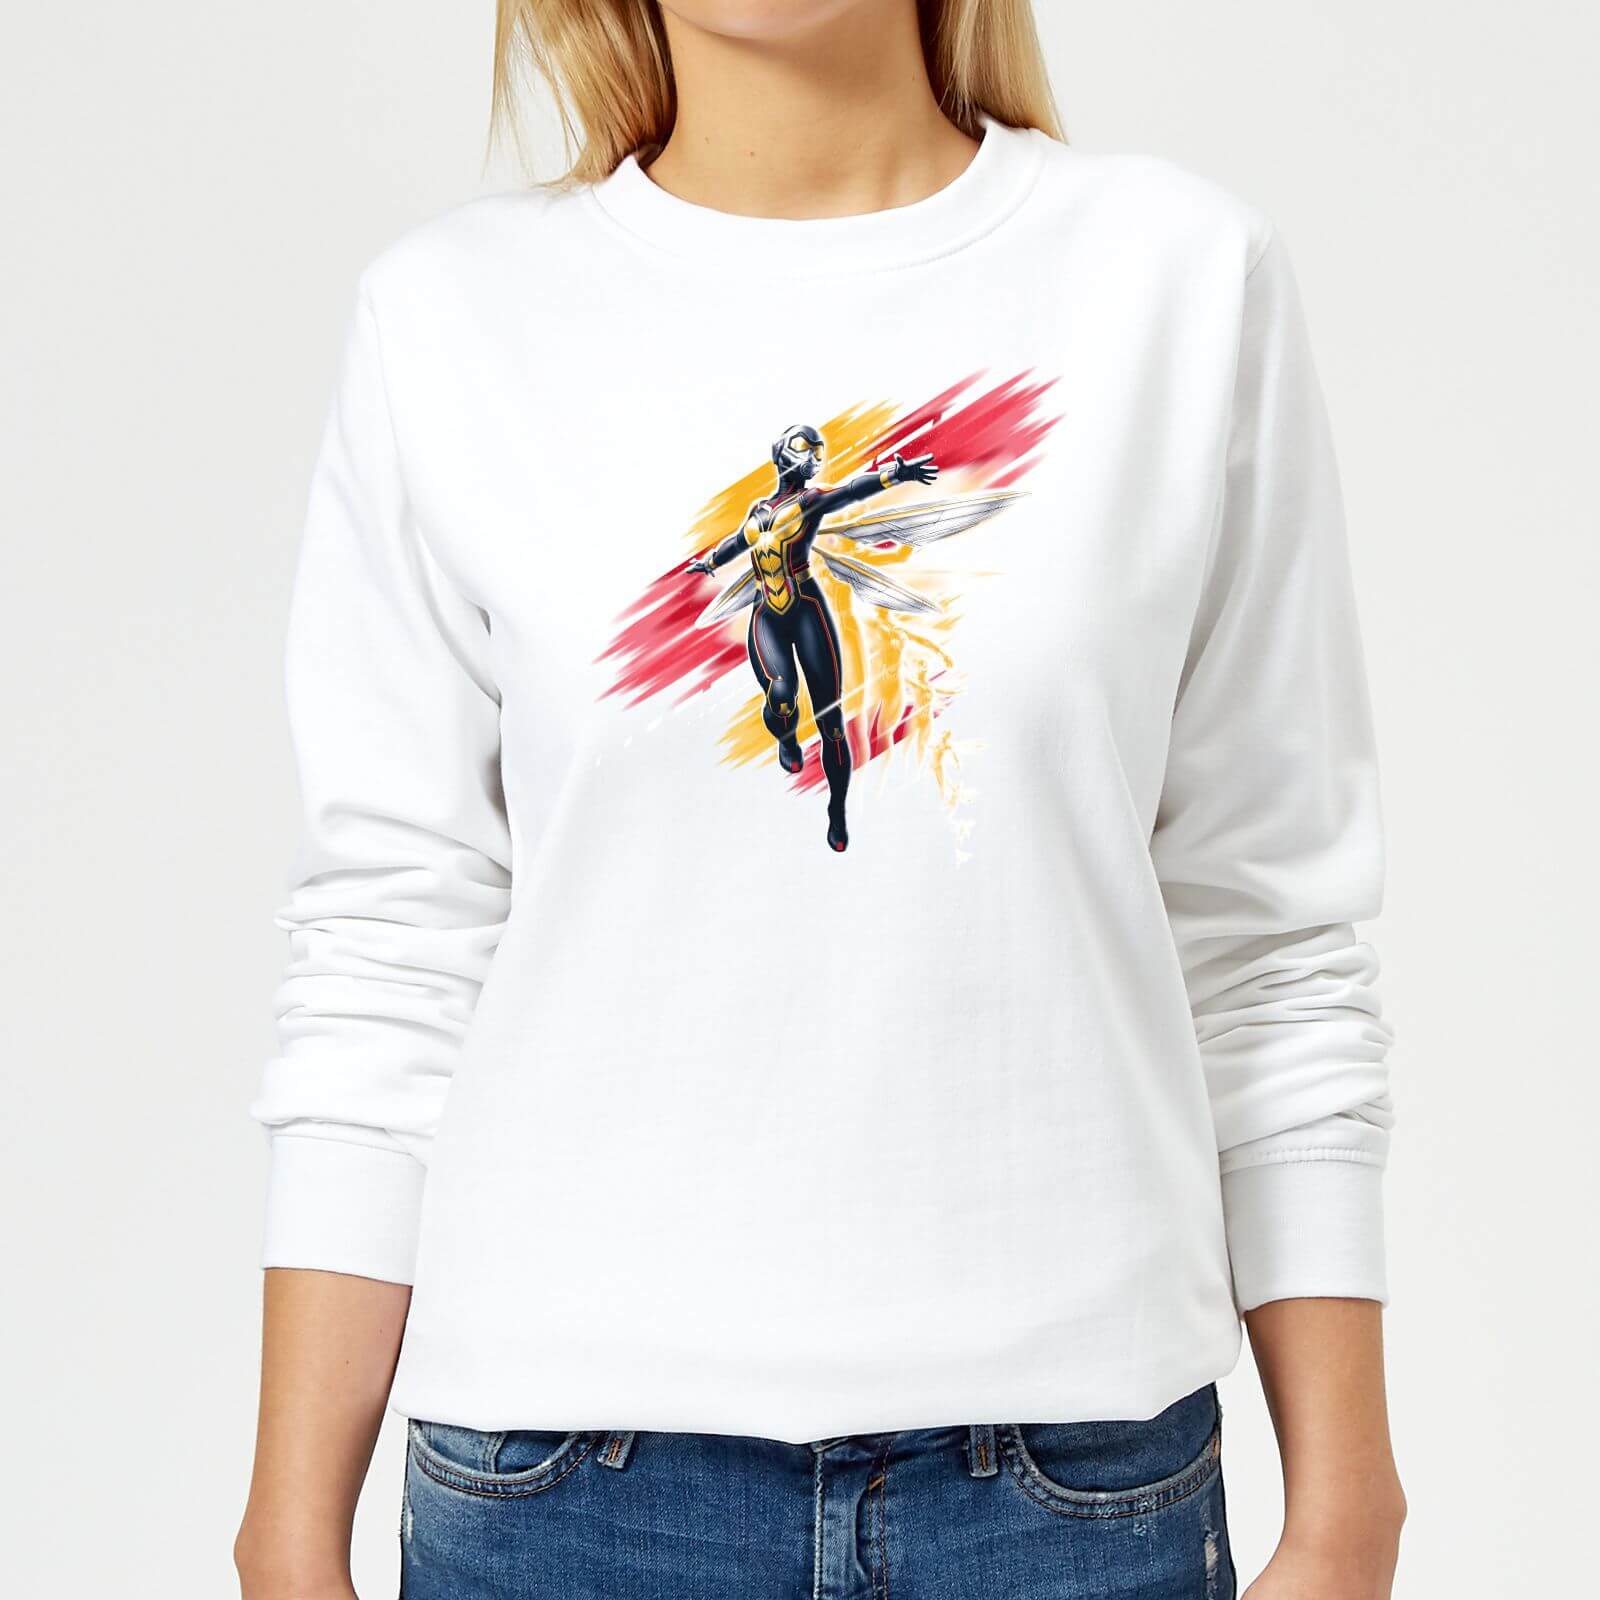 Ant-Man And The Wasp Brushed Women's Sweatshirt - White - L